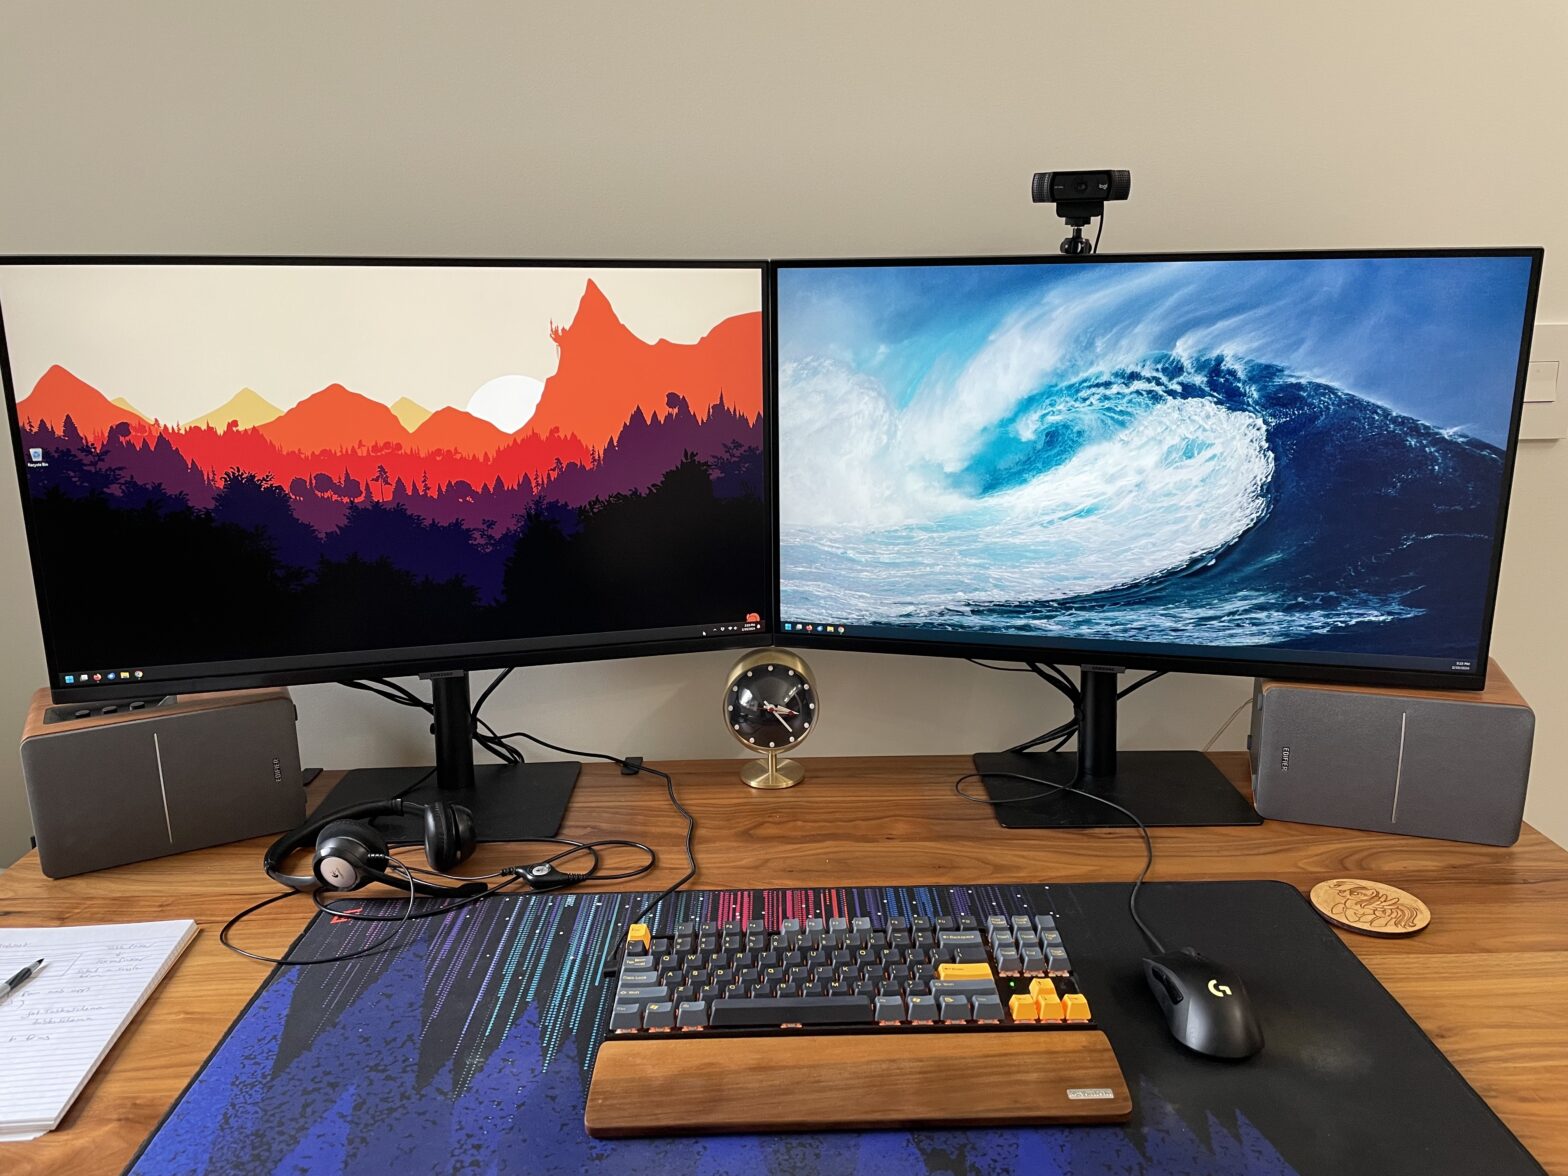 Dual Samsung 32 inch monitors side by side on a wood desk with a Keychron keyboard in the foreground